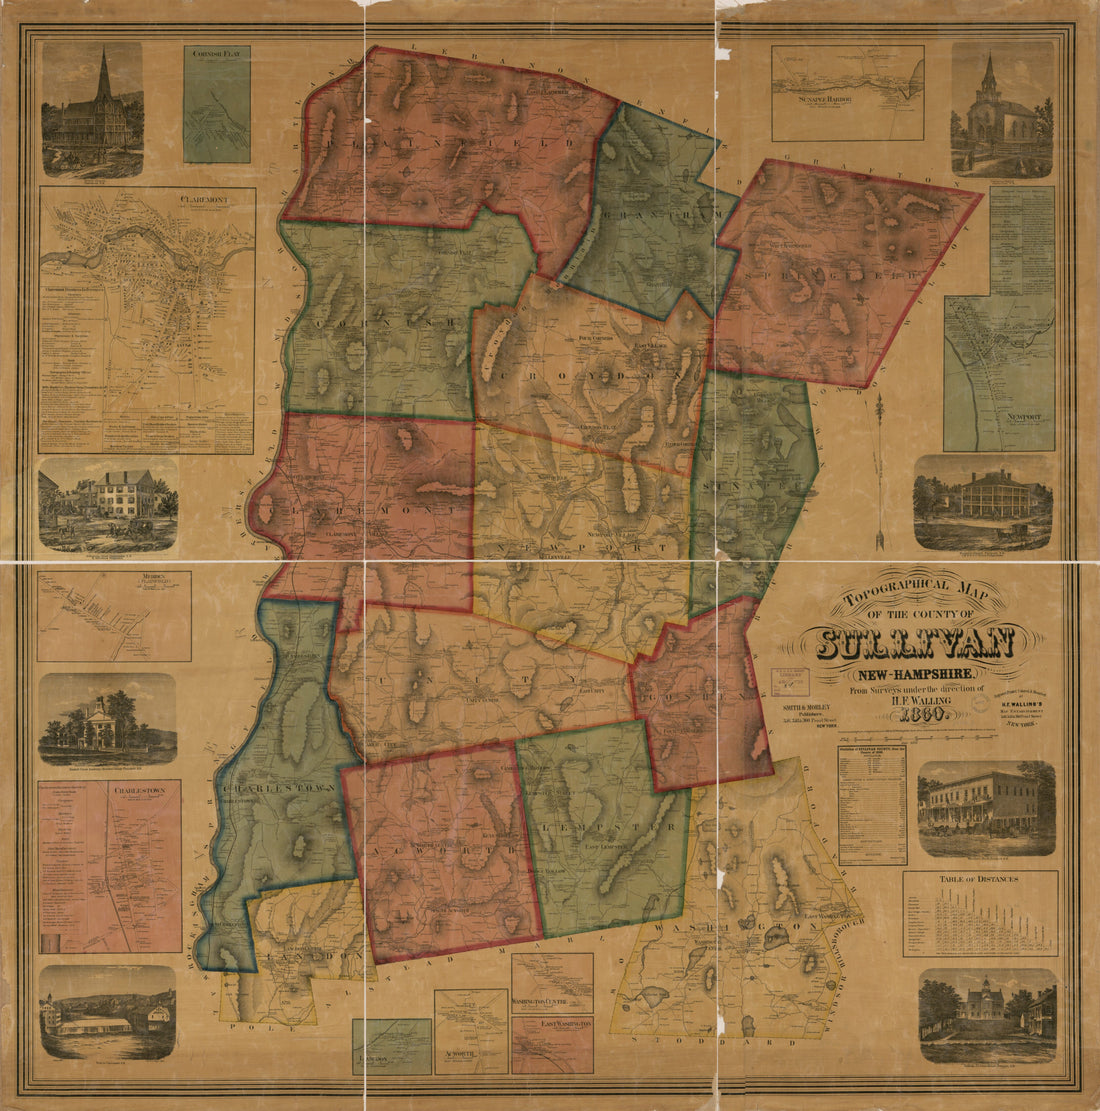 This old map of Topographical Map of the County of Sullivan, New Hampshire from 1860 was created by  Smith &amp; Morley, Henry Francis Walling in 1860